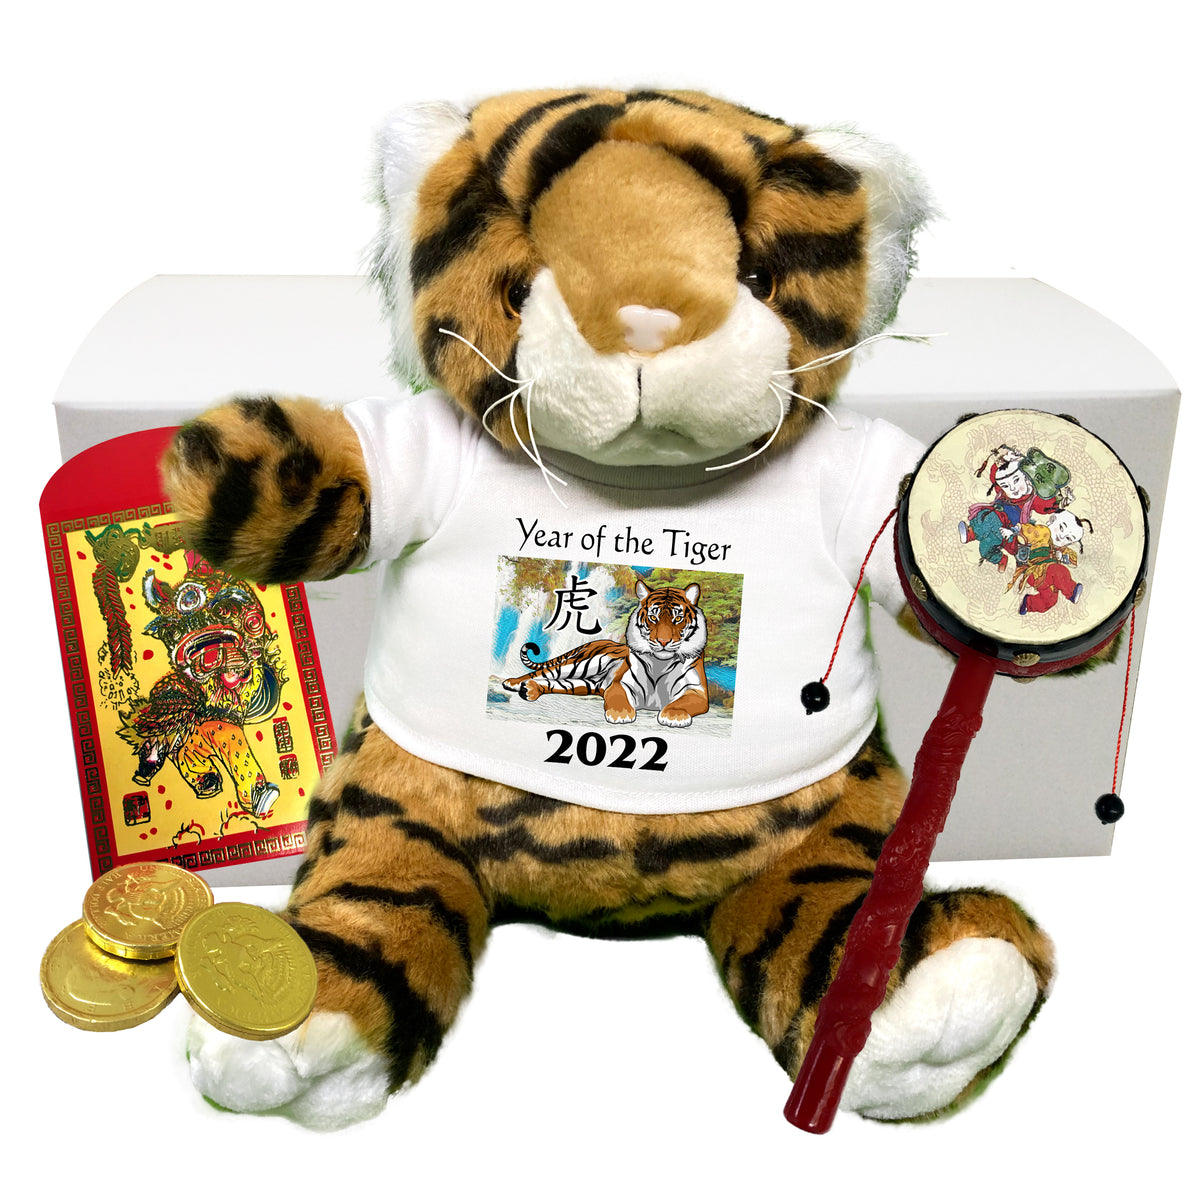 Chinese New Year Personalized Plush Tiger Gift Set - 2022 Year of the Tiger, 9" Plush Plumpee Tiger